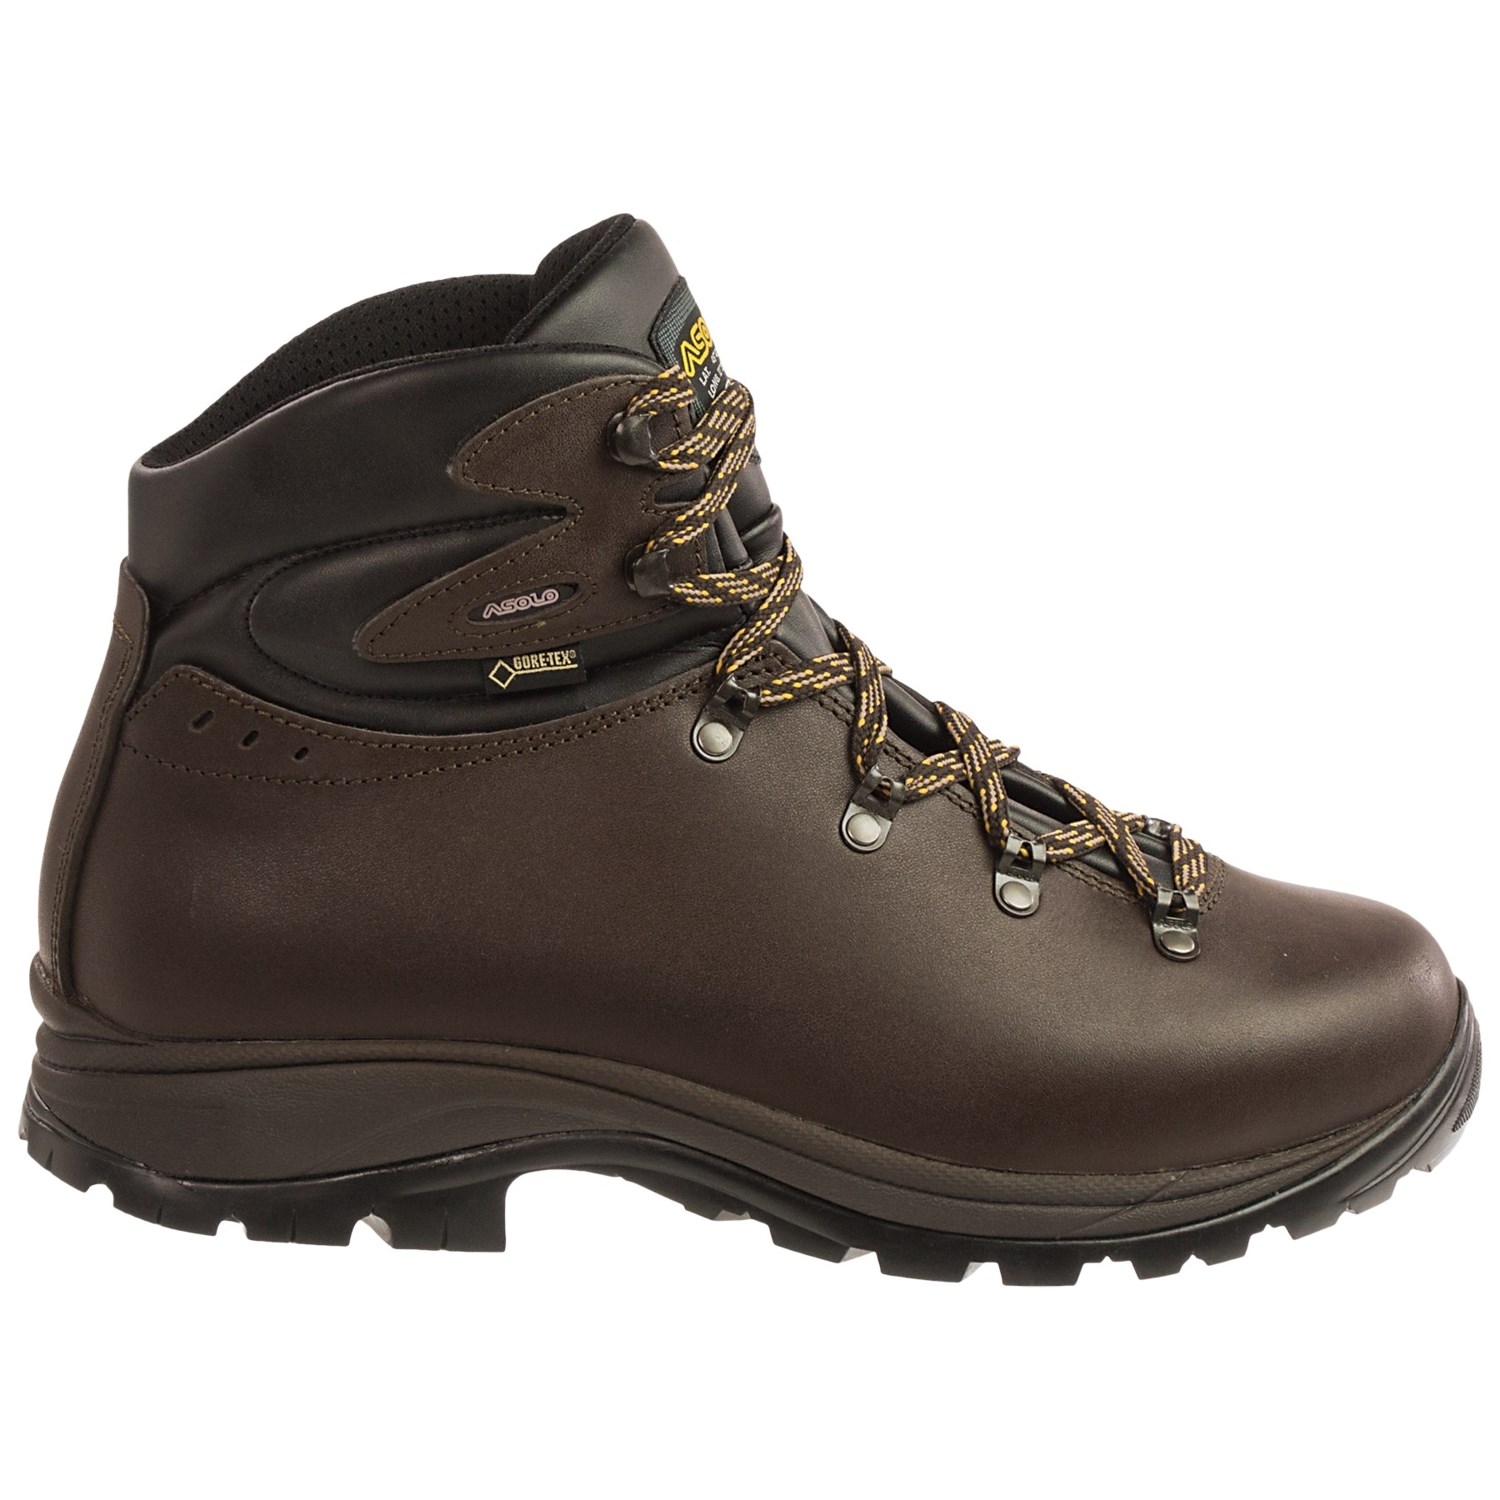 Asolo Scafell Gore-Tex® Hiking Boots (For Men) - Save 37%